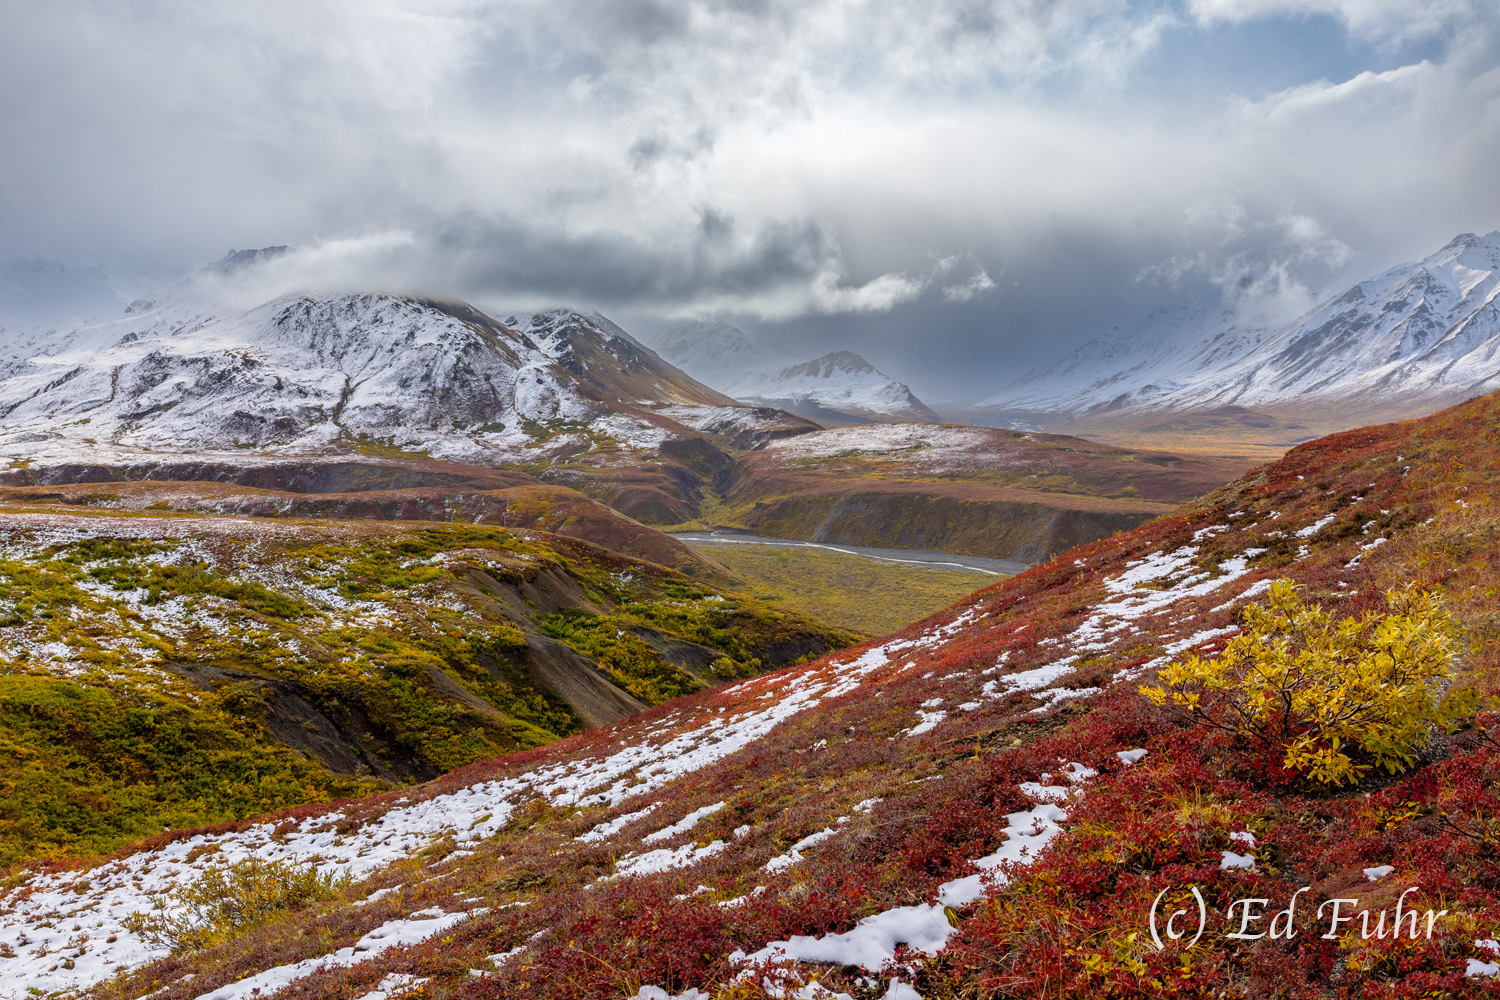 The first snow of the season has arrived in Denali National Park even as Fall's tundra blazes in its robe of vibrant reds and...